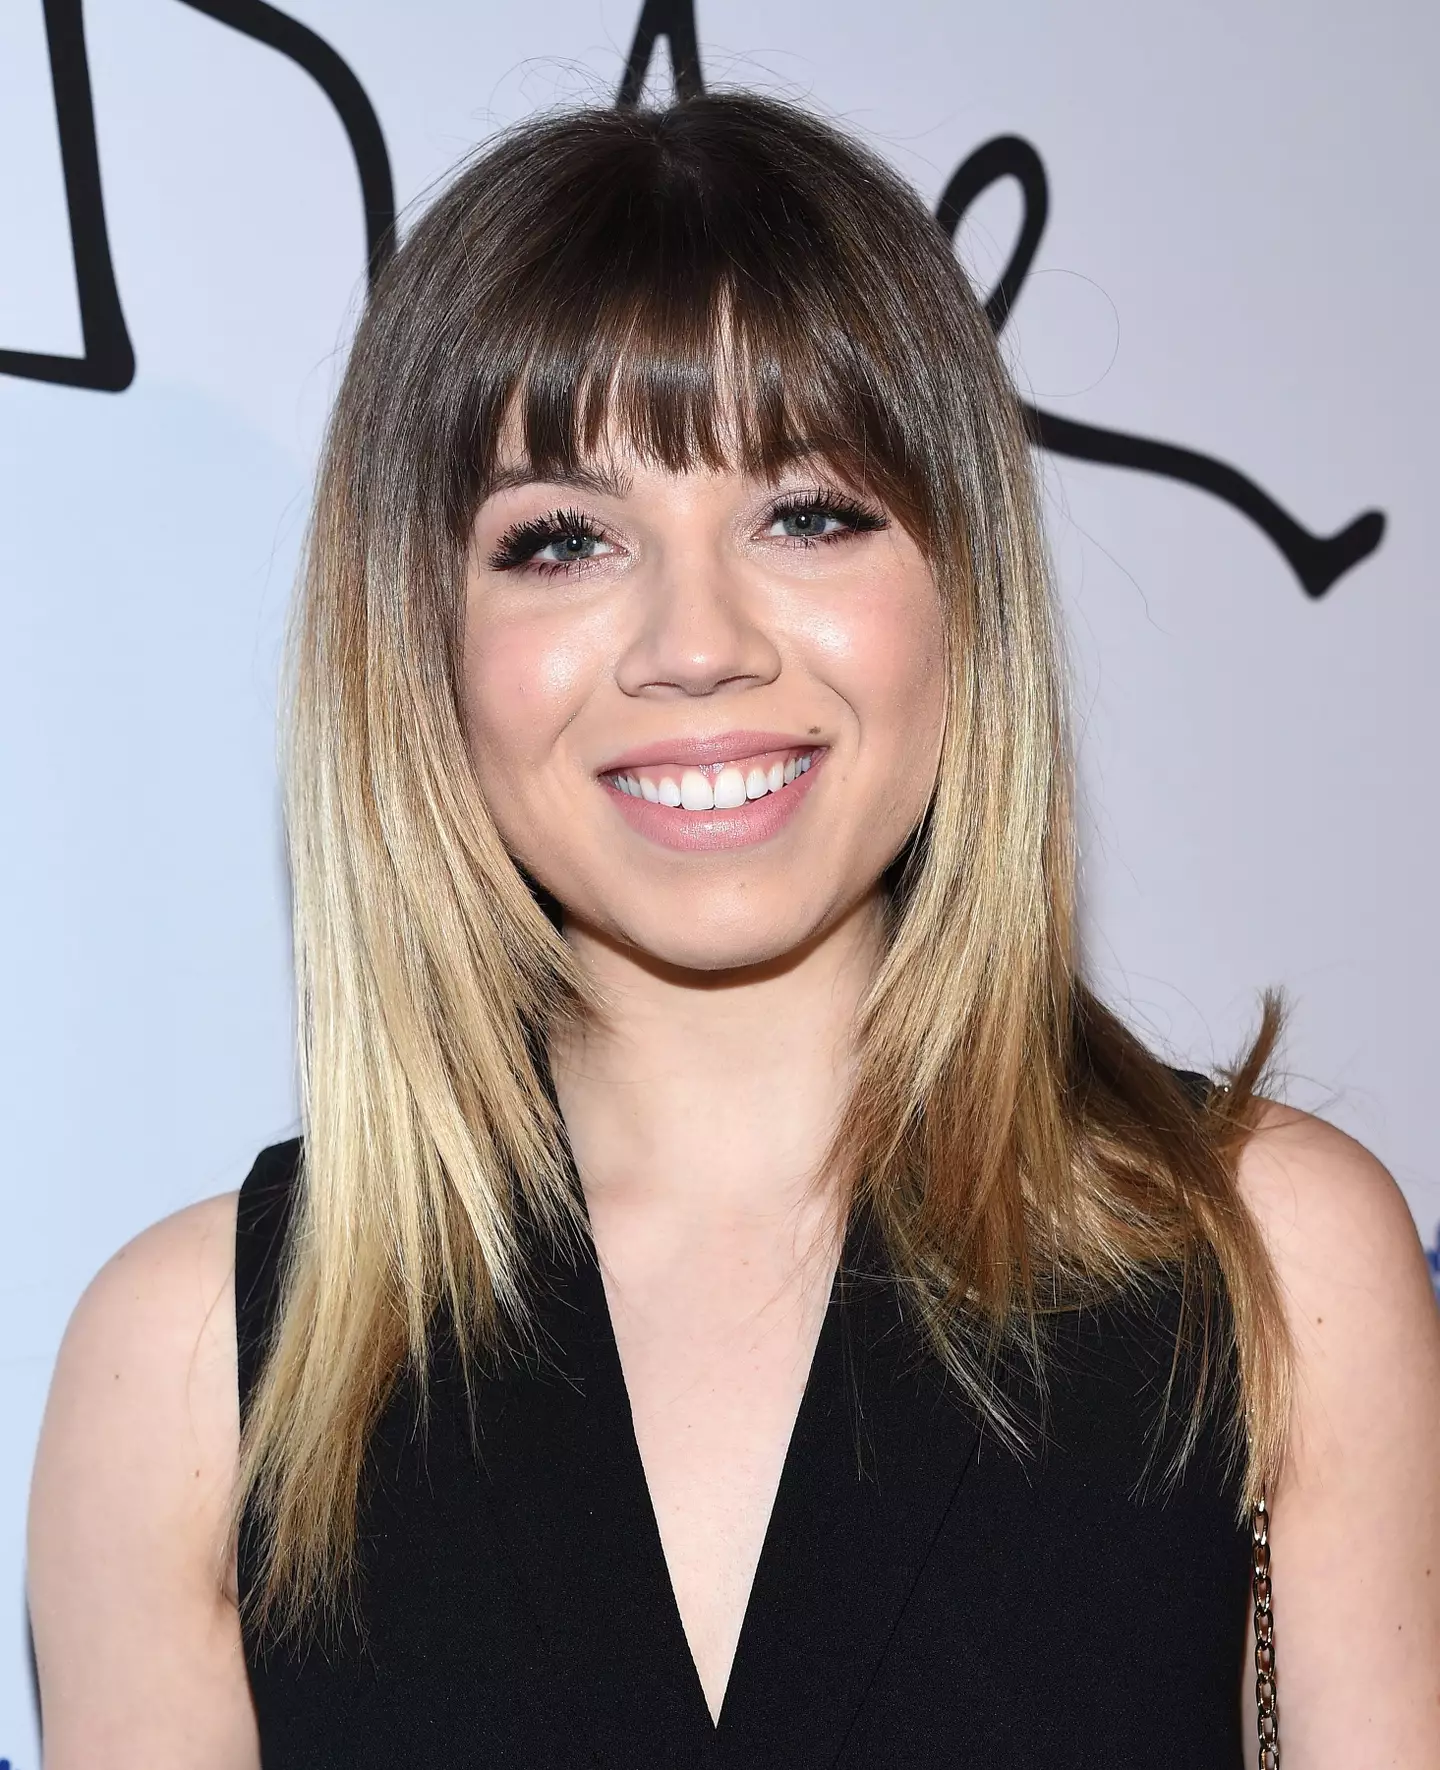 Jennette McCurdy has quit acting.